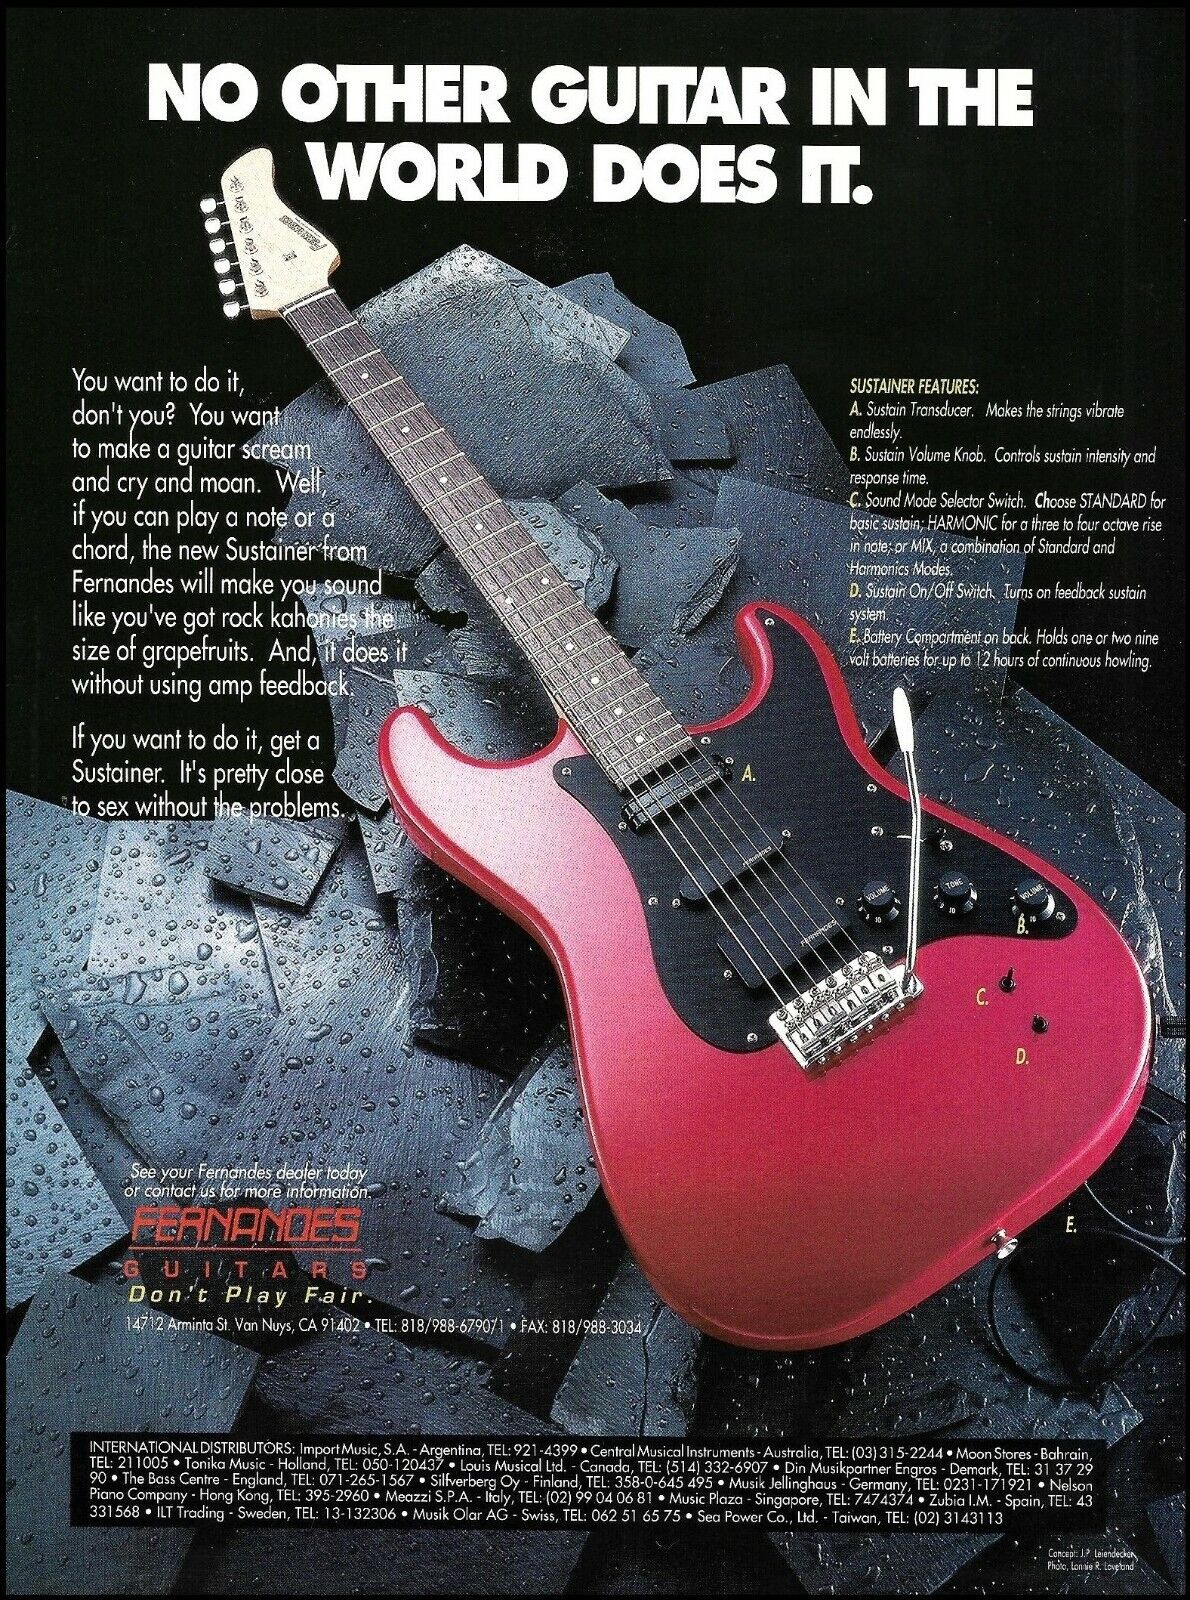 Fernandes Sustainer Series 1992 electric guitar advertisement 8 x 11 ad print